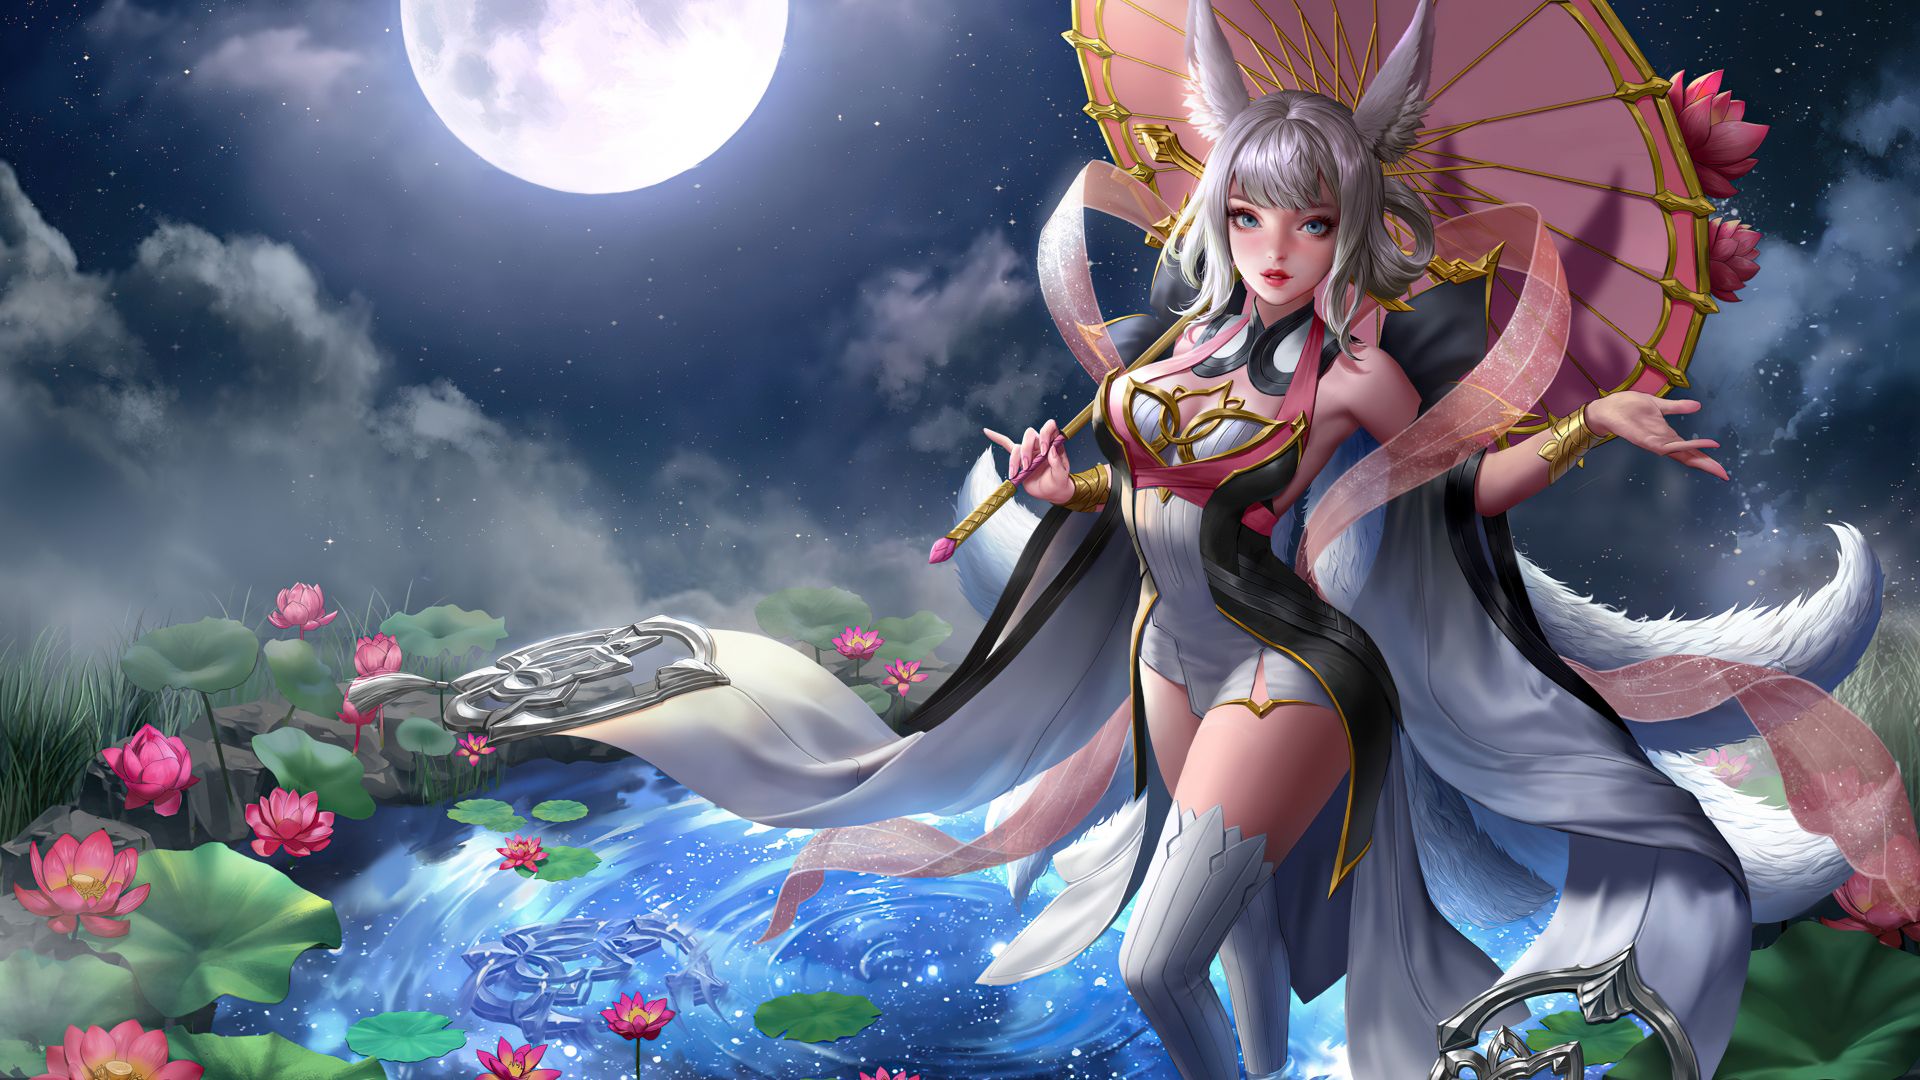 Desktop Wallpaper Anime Girl, Water Lilies, Moon, Fantasy, HD Image, Picture, Background, Bd6514